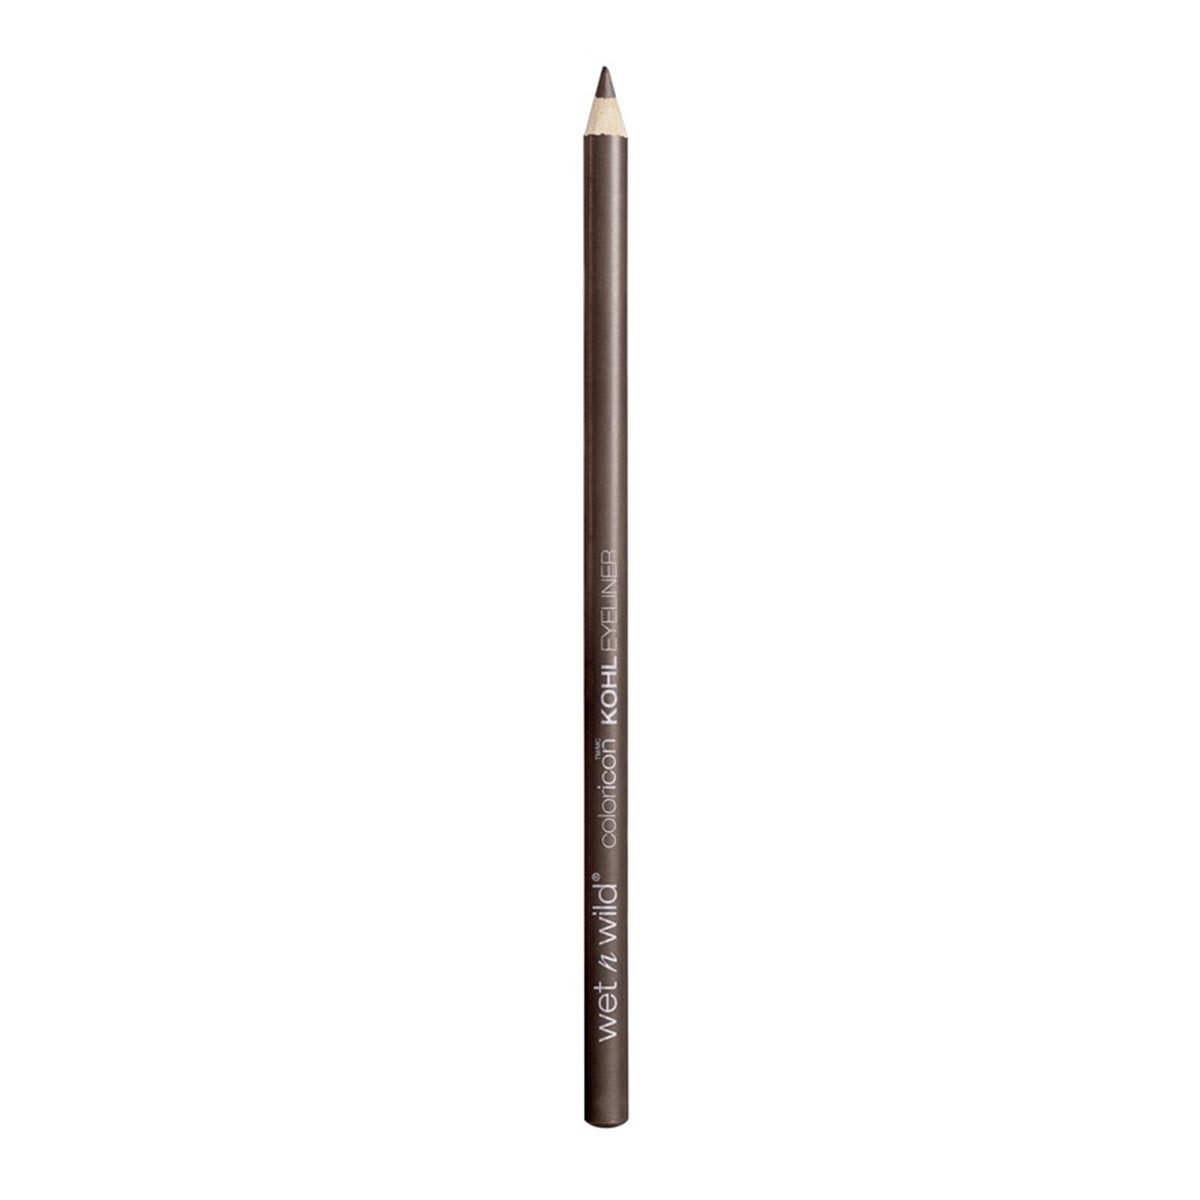 wet-n-wild-coloricon-khol-eyeliner-simma-brown-now